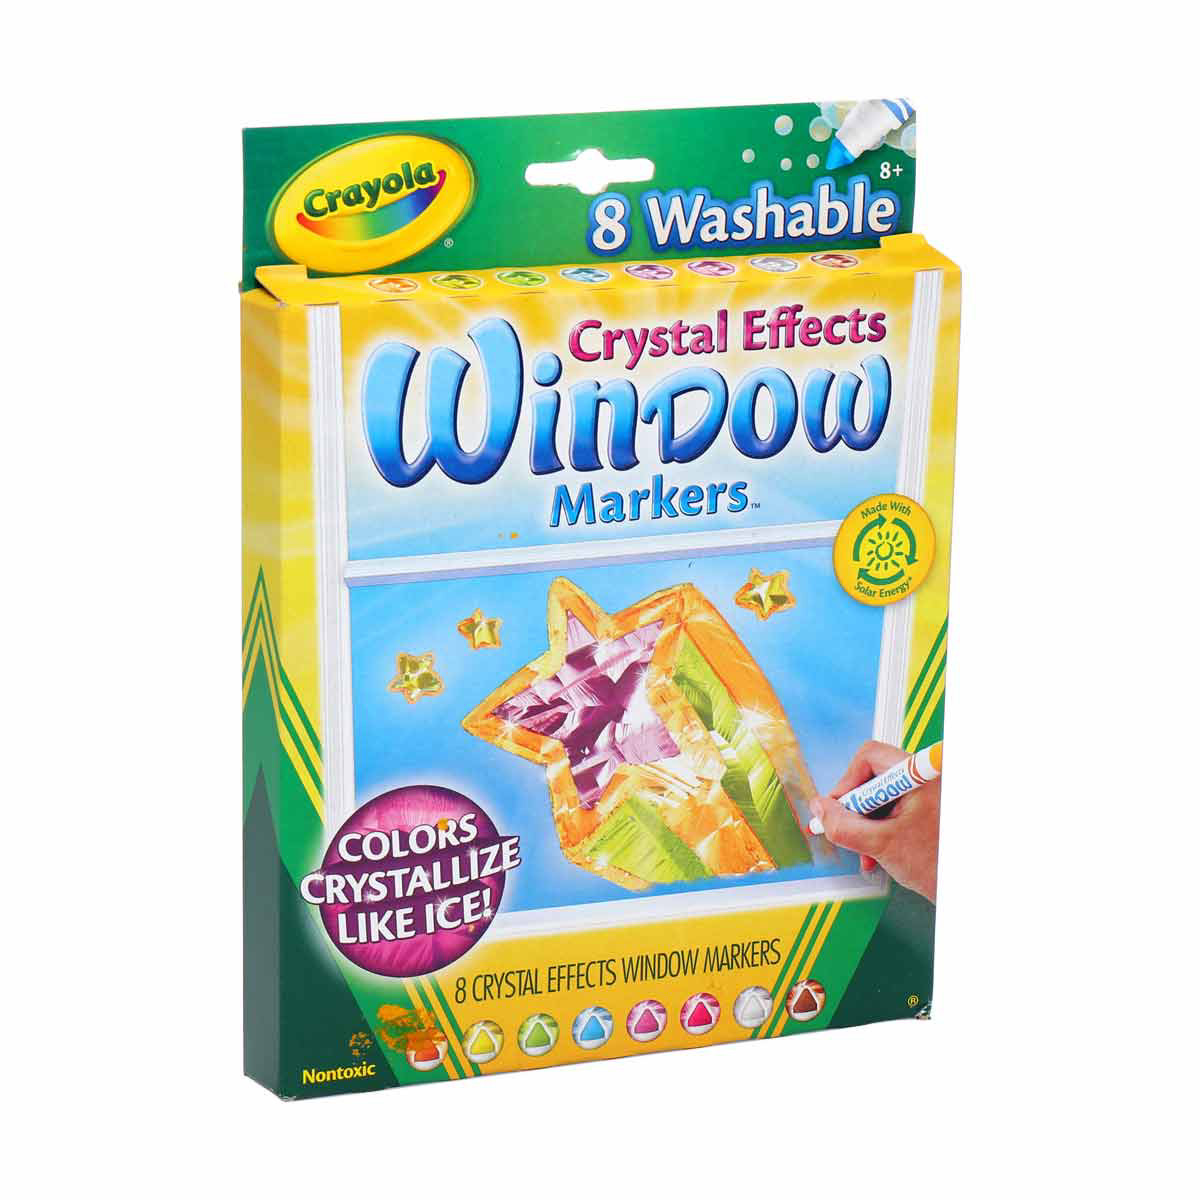 Crayola Washable Crystal Effects Window Markers, 8 Count